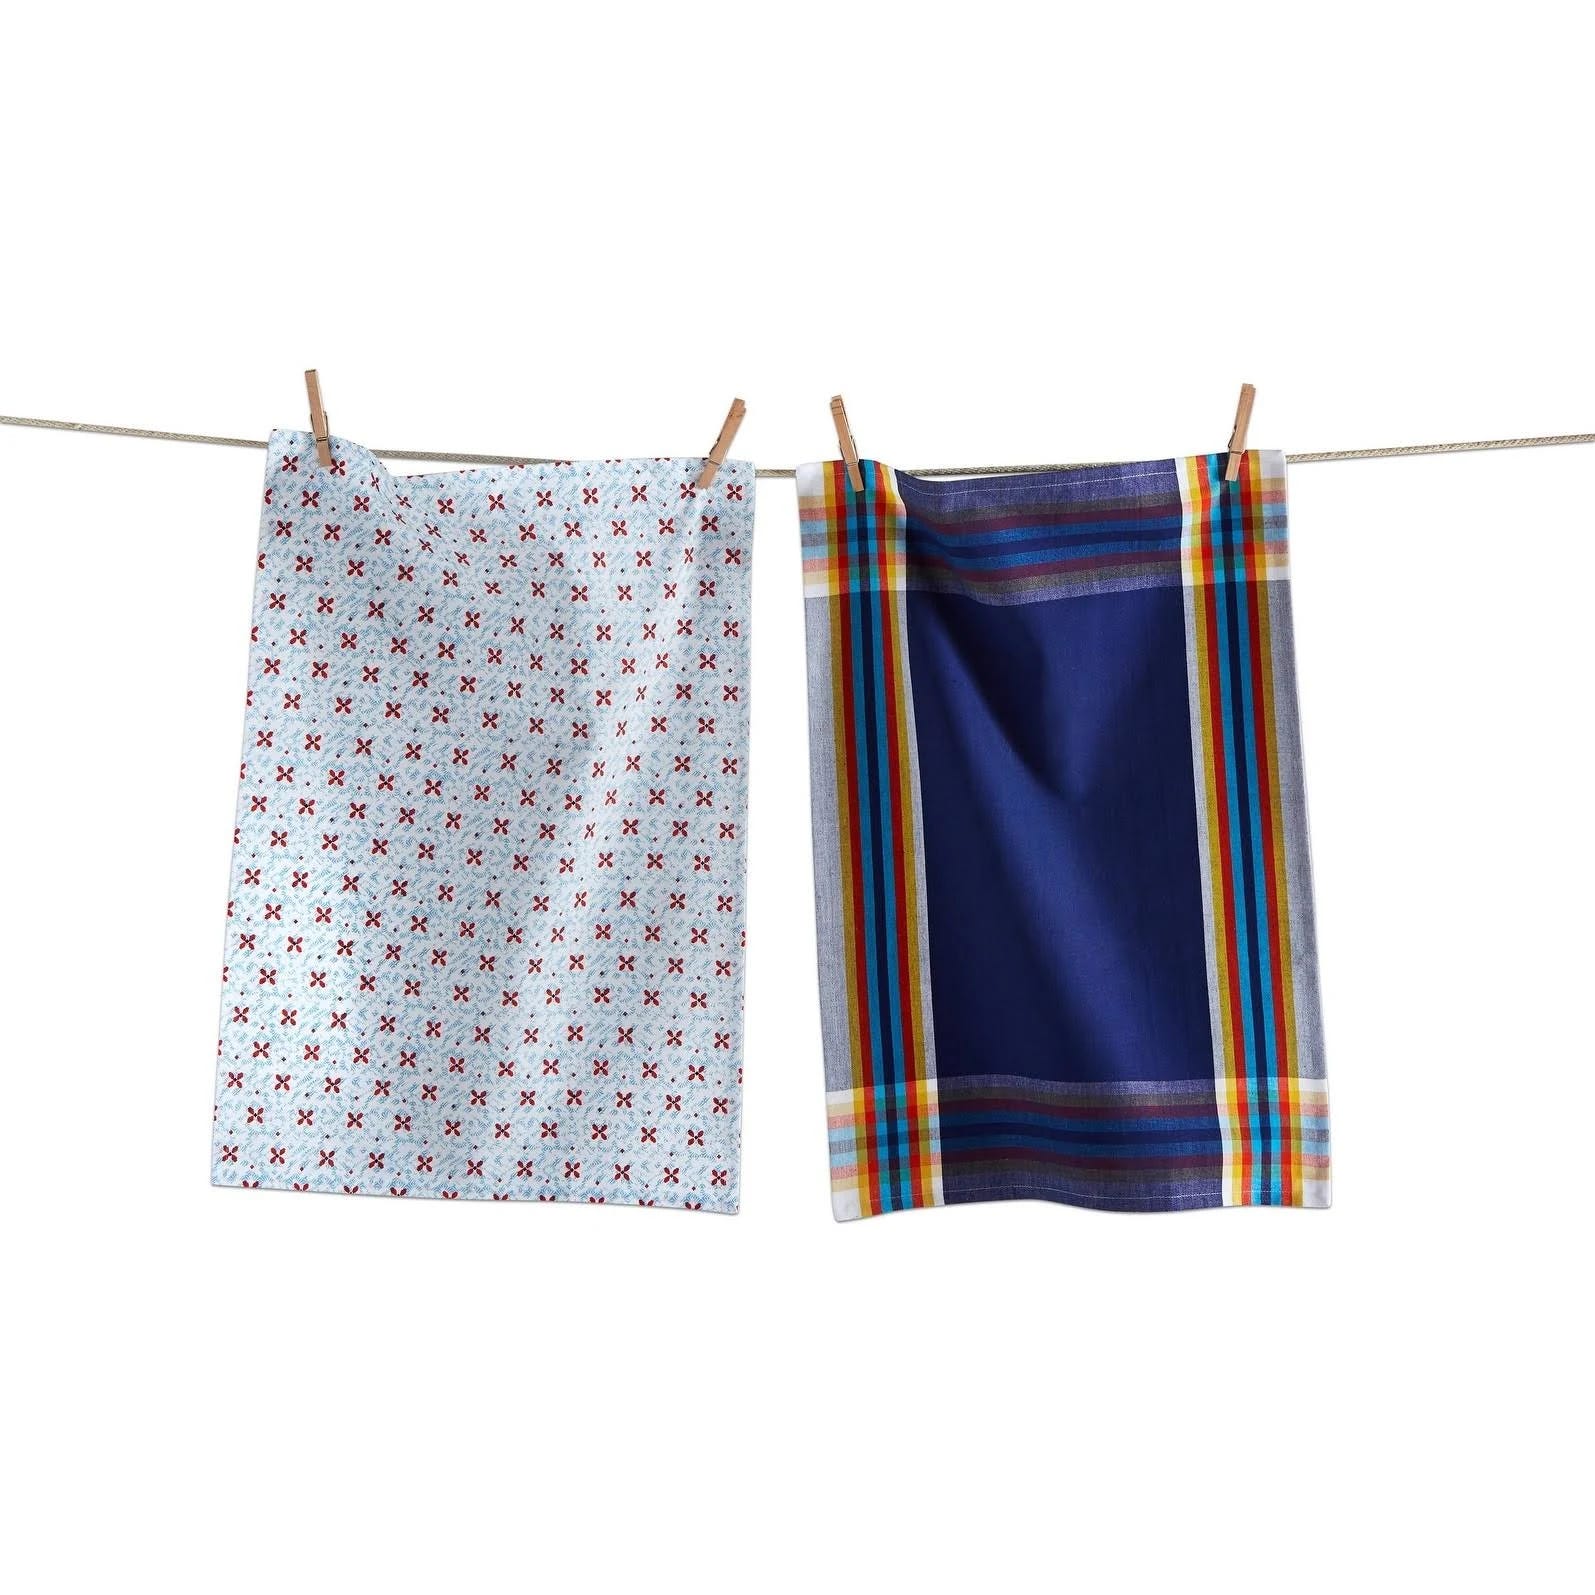 Peggable Flour Sack Towel Set - Versatile for Straining and Covering | Image